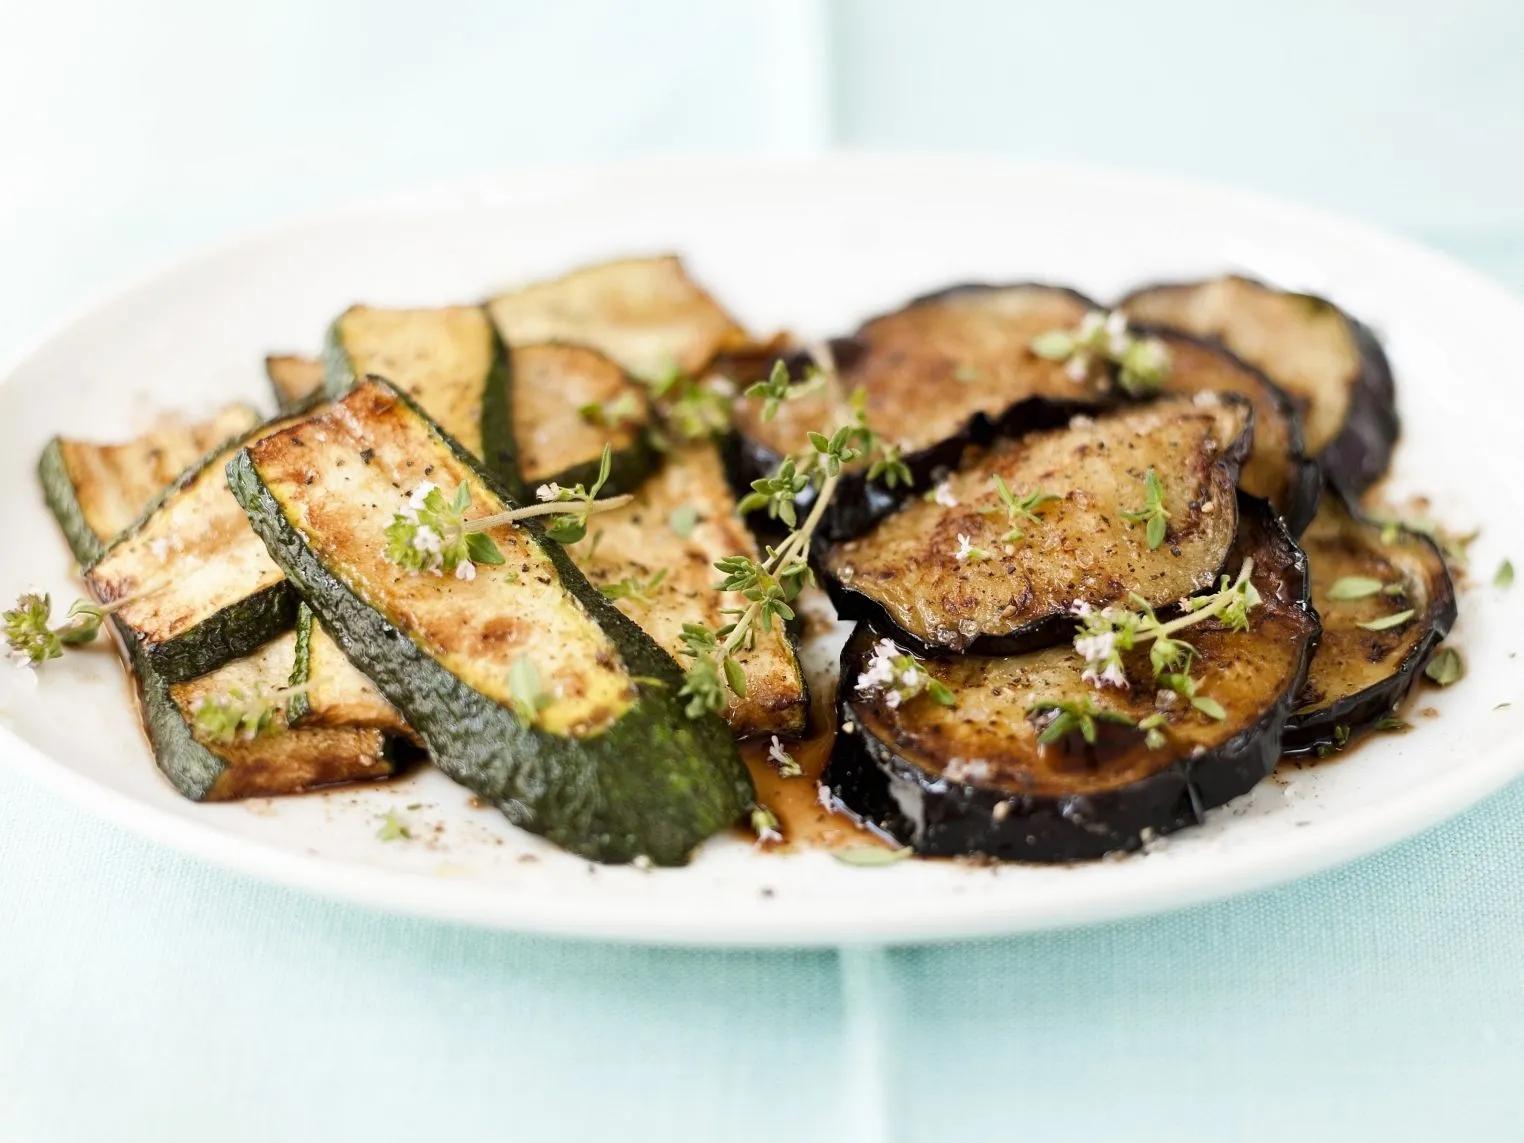 Fried Zucchini and Eggplant Slices recipe | Eat Smarter USA